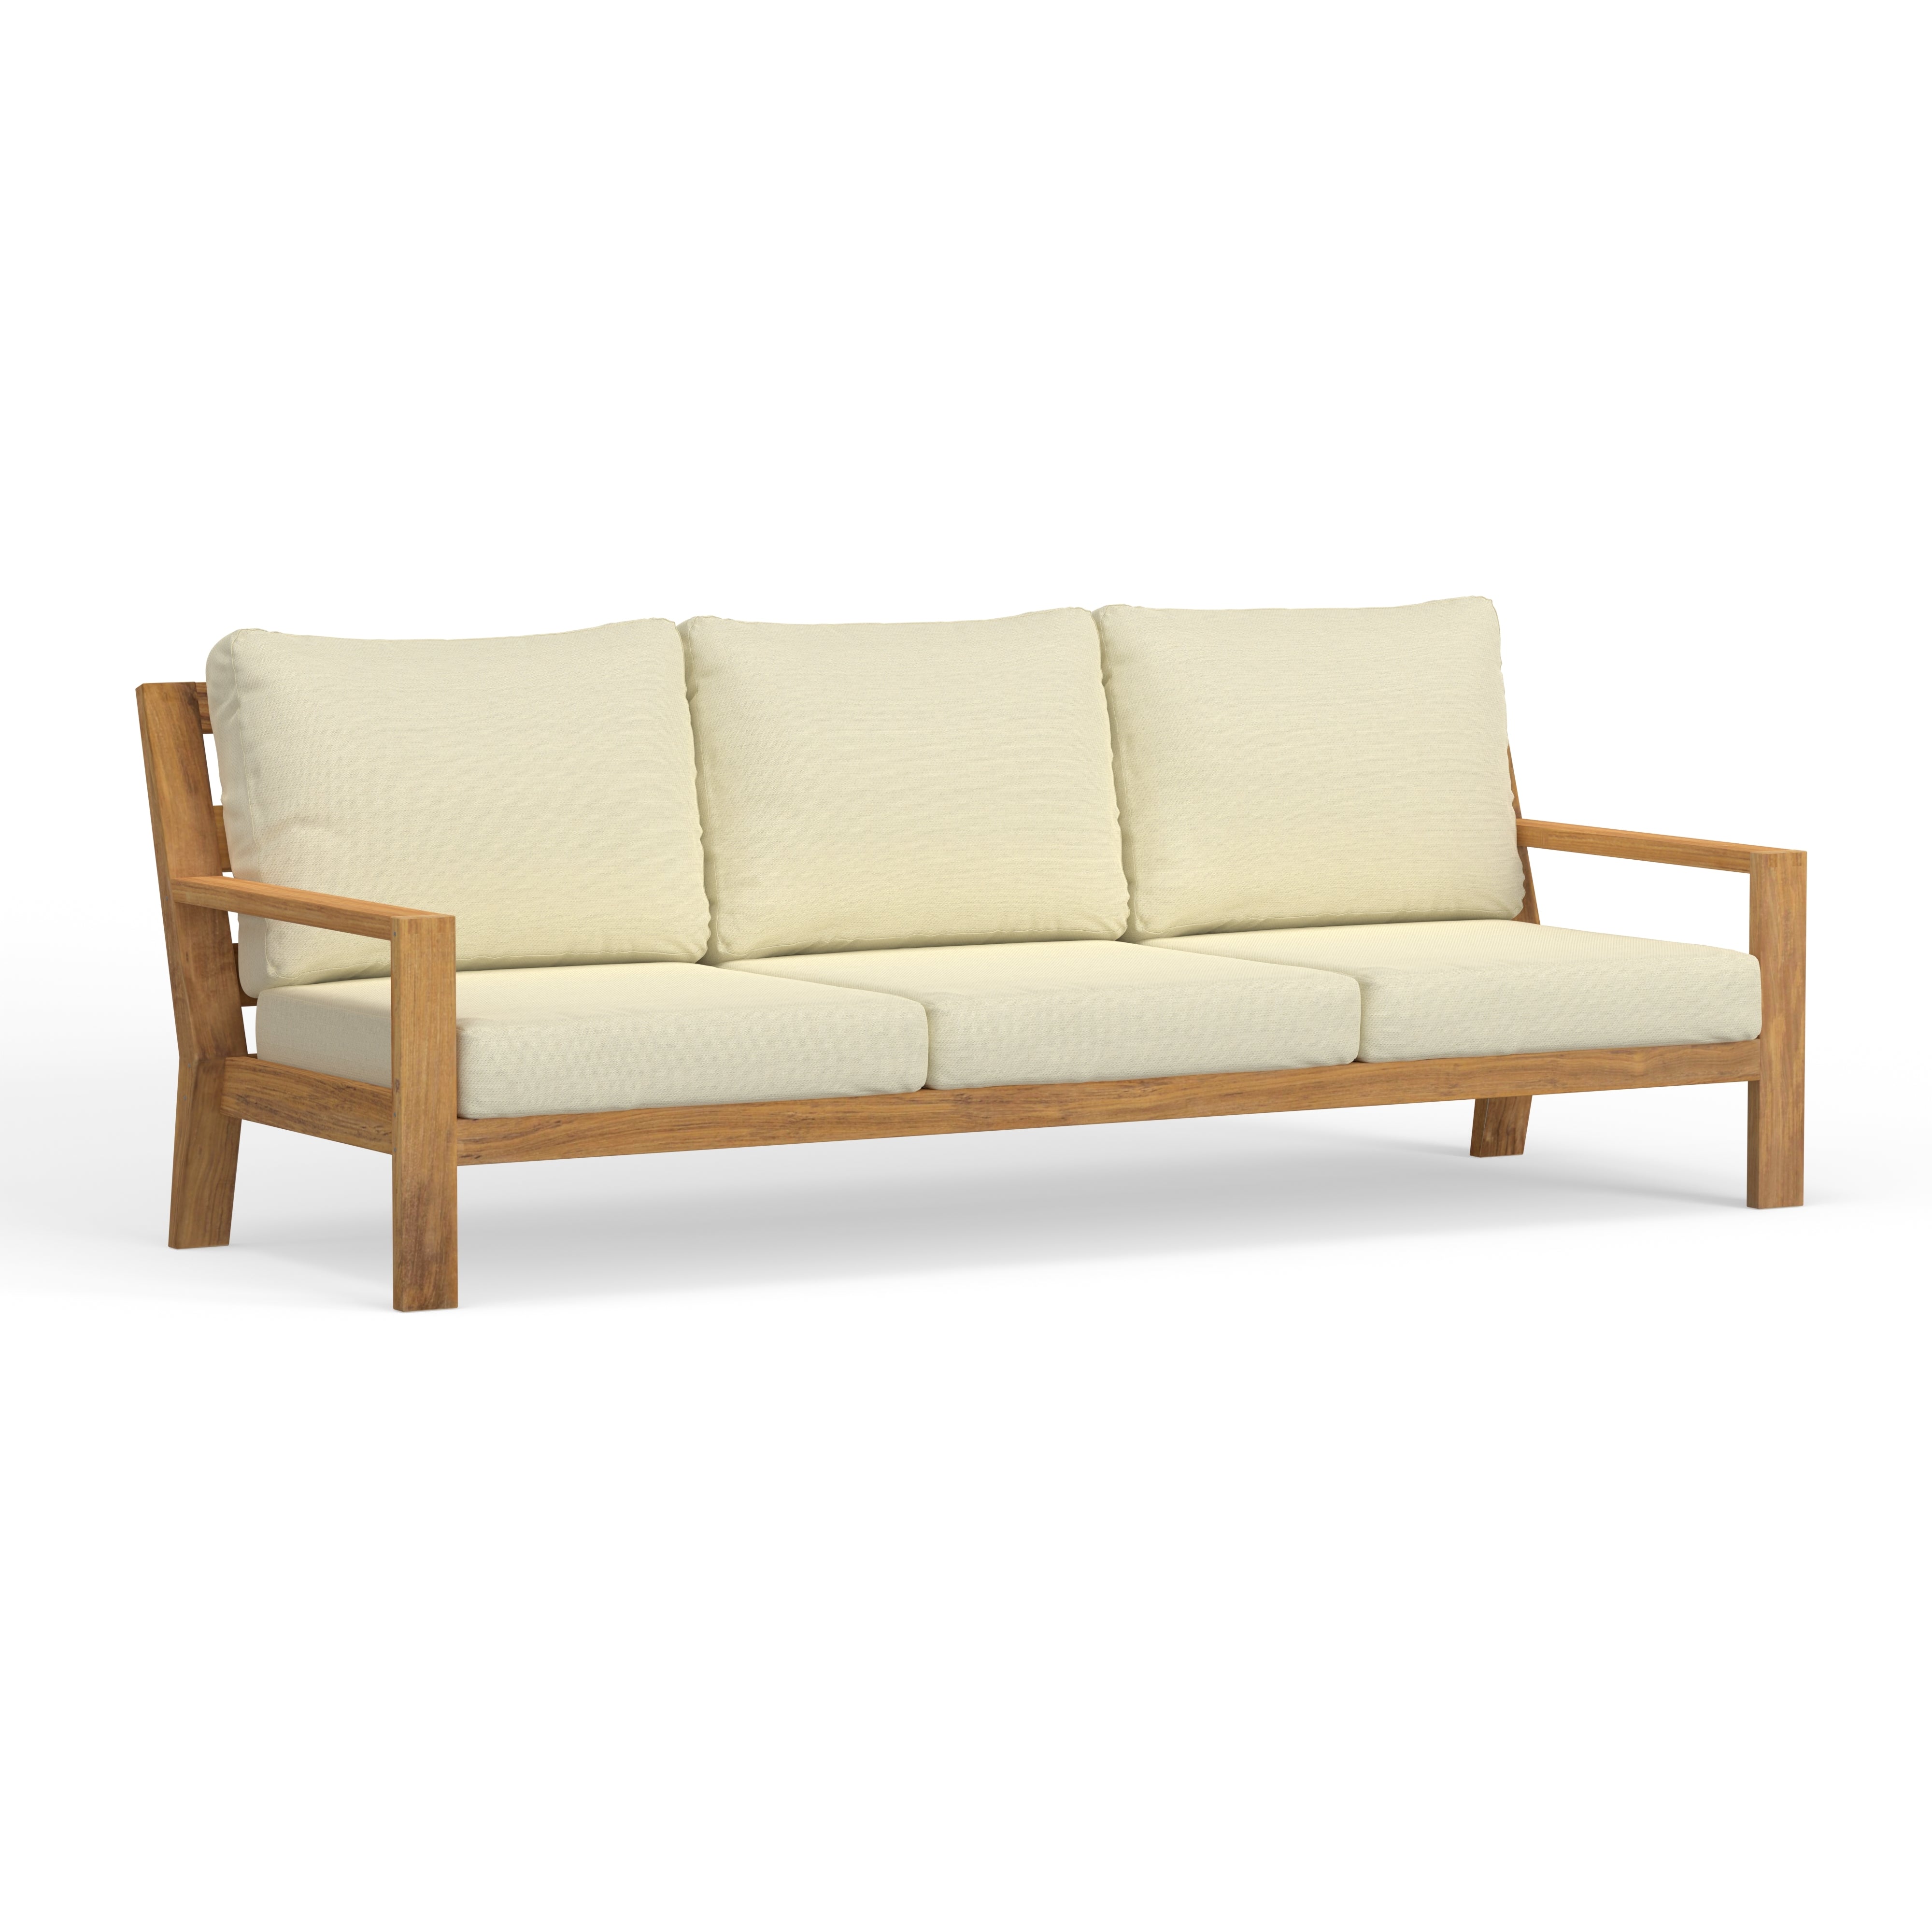 Most Comfortable Modern Teak Wood Outdoor Sofa That Will Really Last